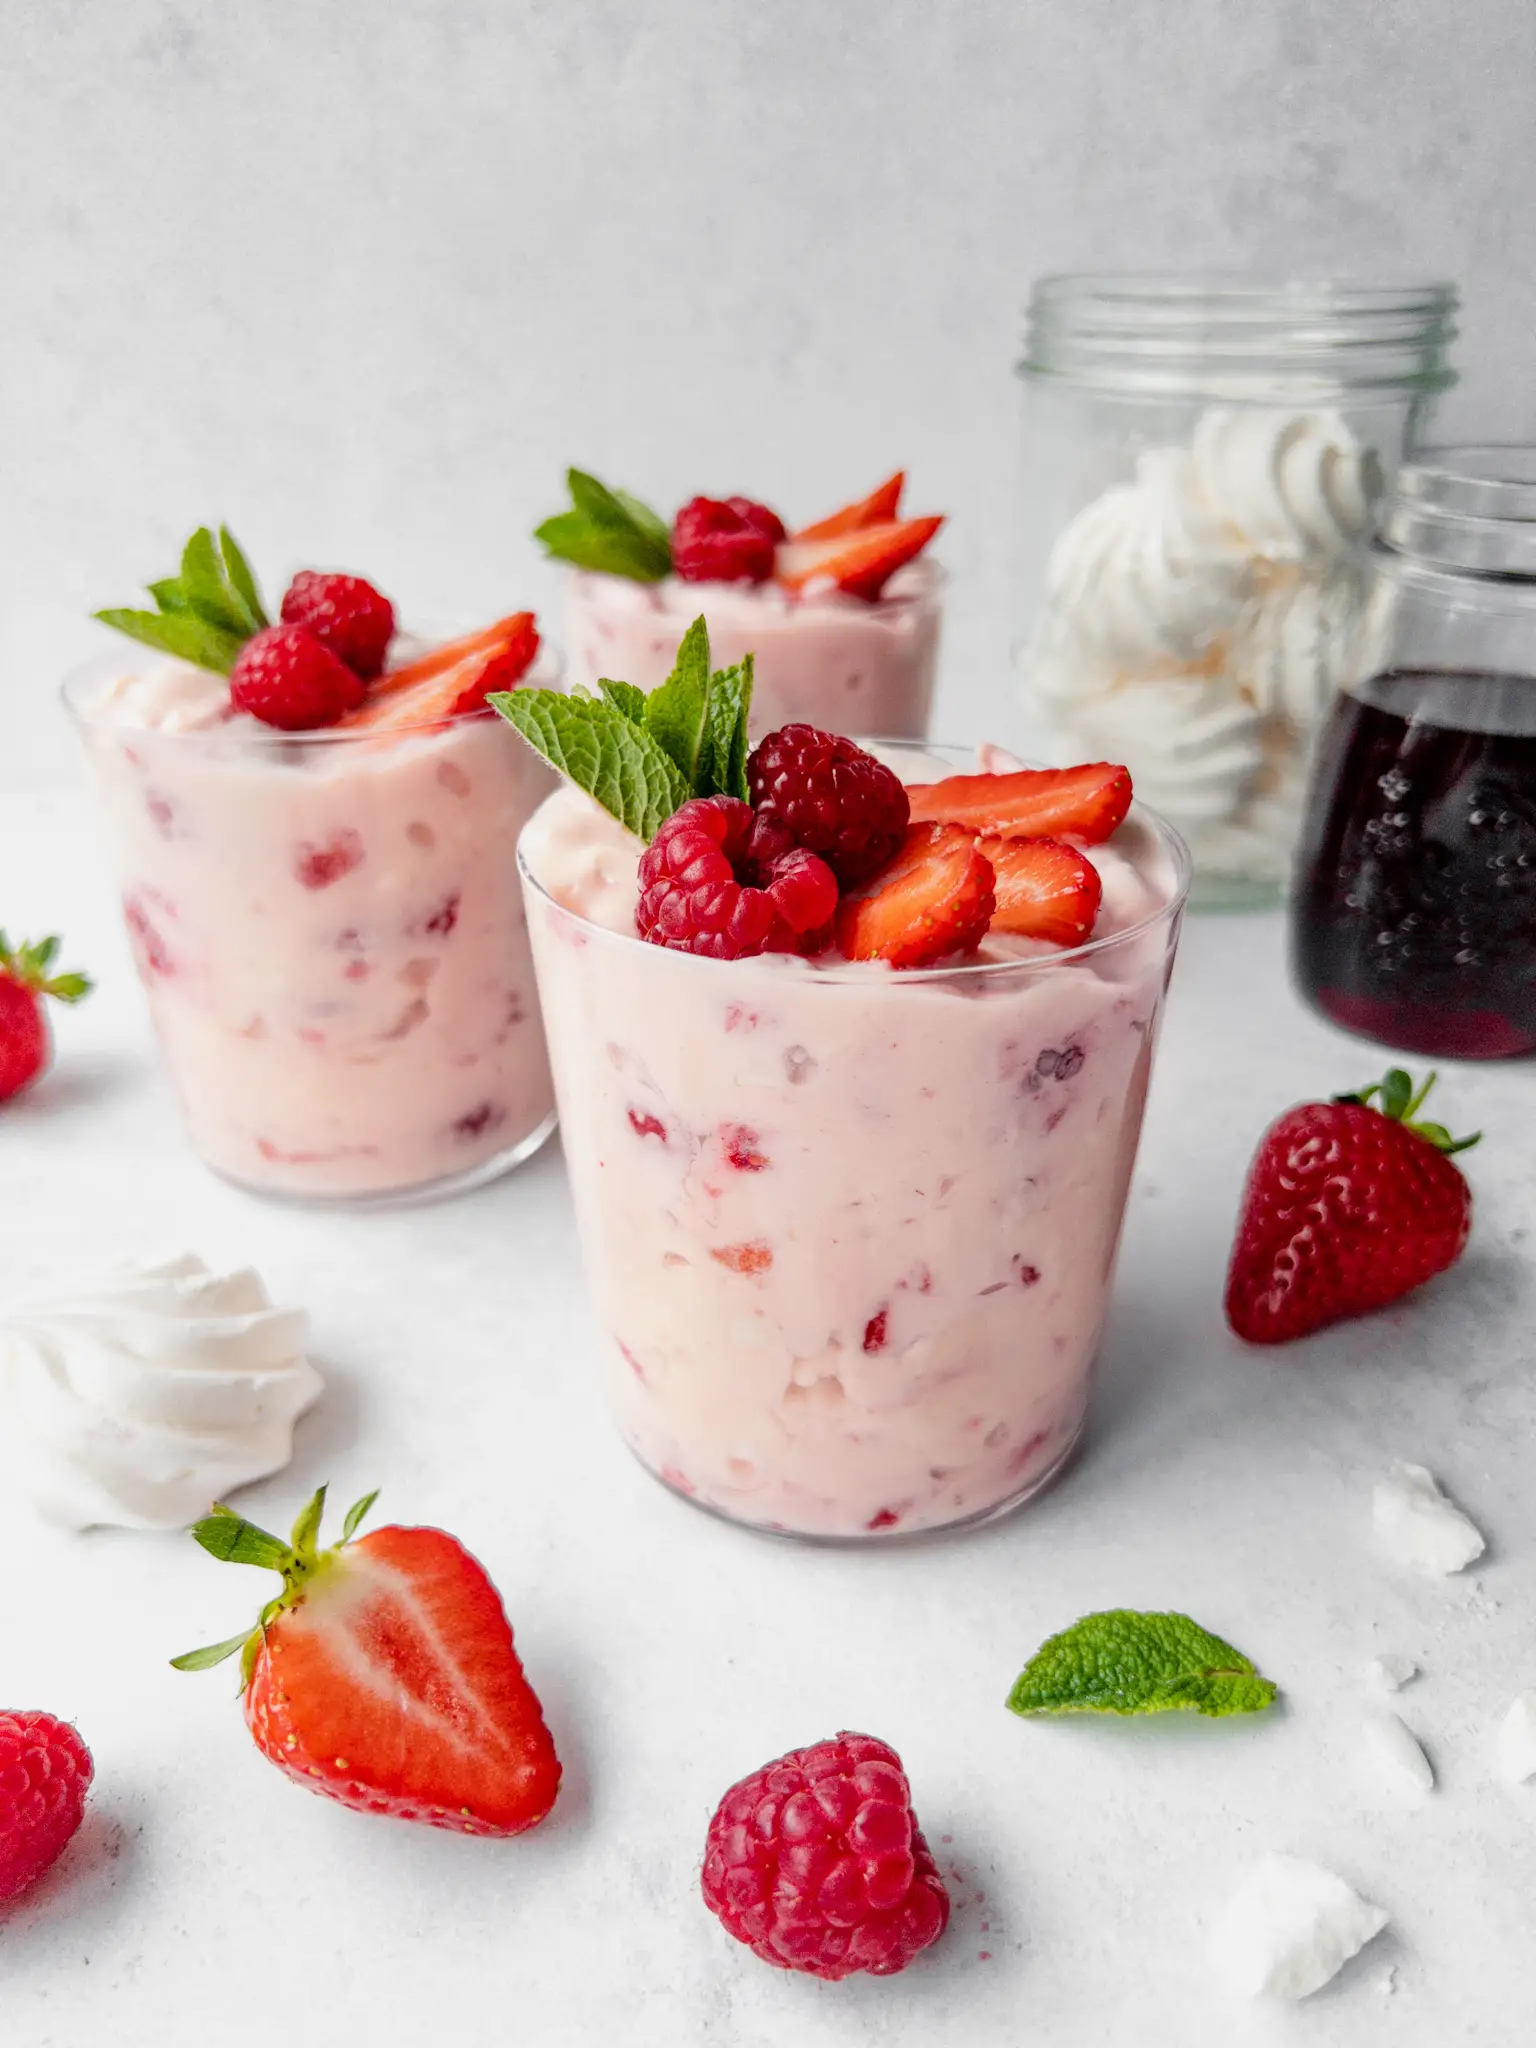 Quick and Easy Eton Mess with ready made meringue